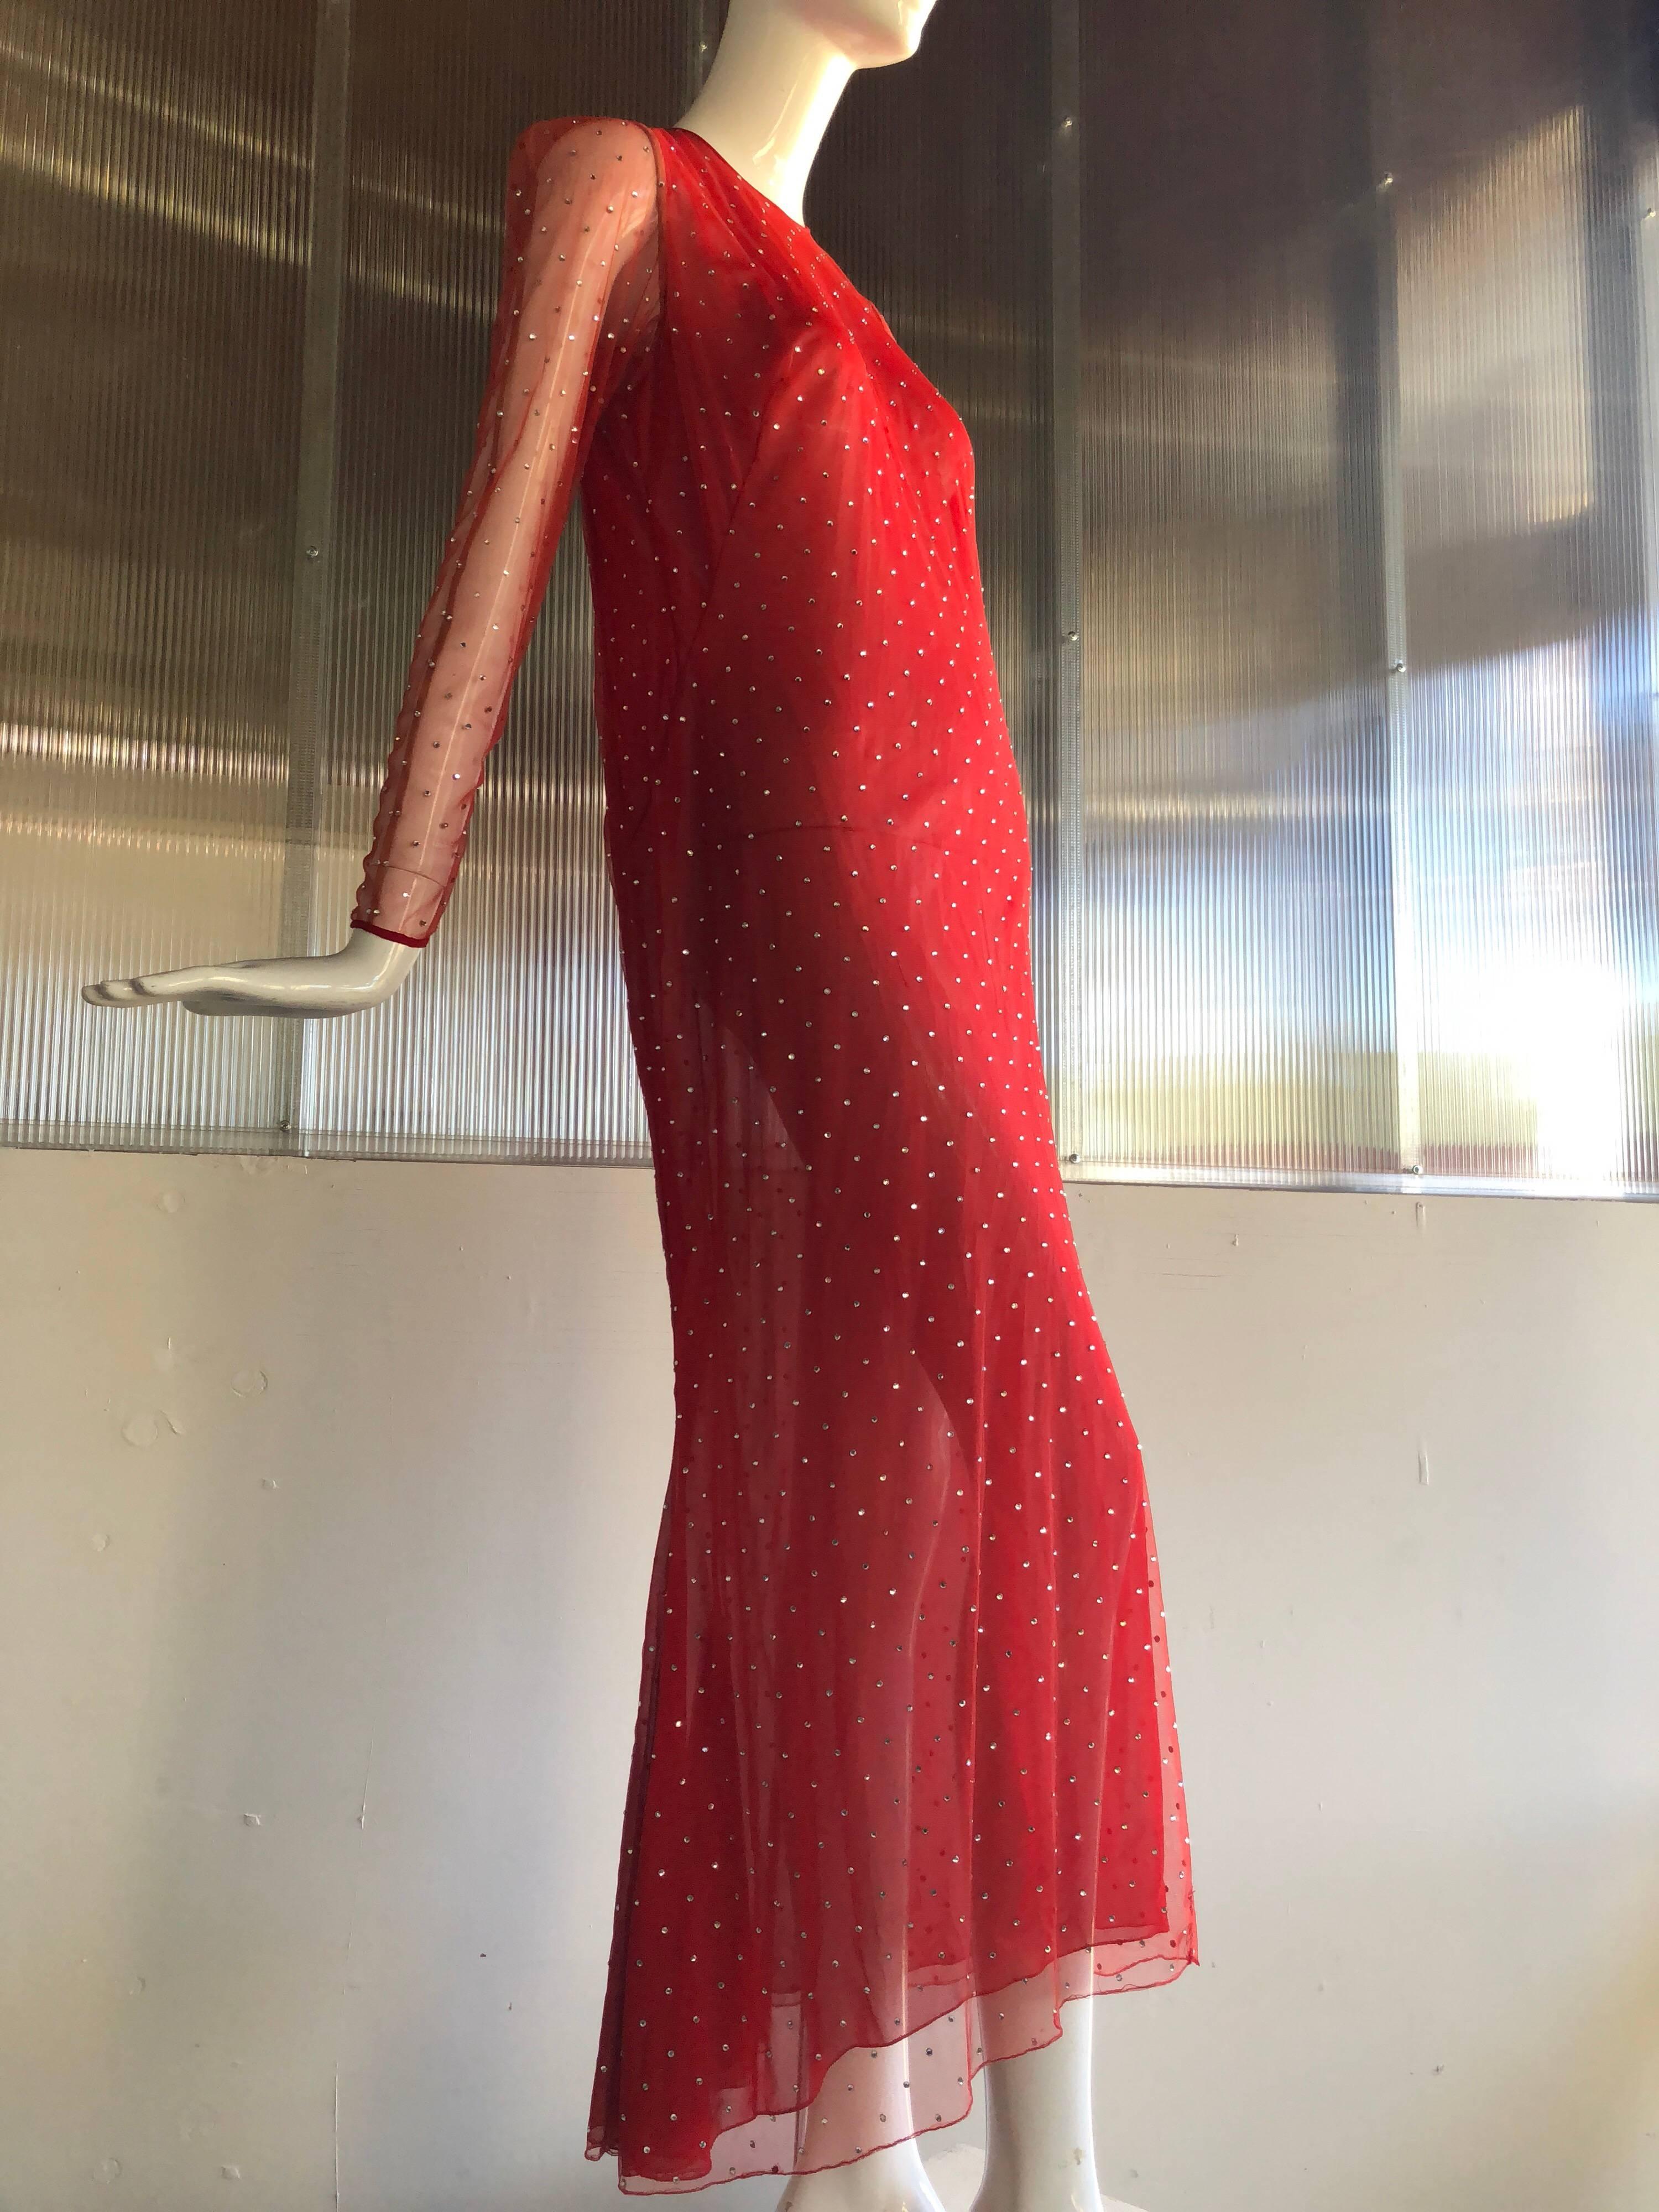 This classic and signature Red by Pauline Trigere net gown is completely studded with rhinestones! 
Featuring long sheer sleeves that button at the wrist and zips up the back. This silhouette reminiscent of a 1930s design is slightly on the bias and